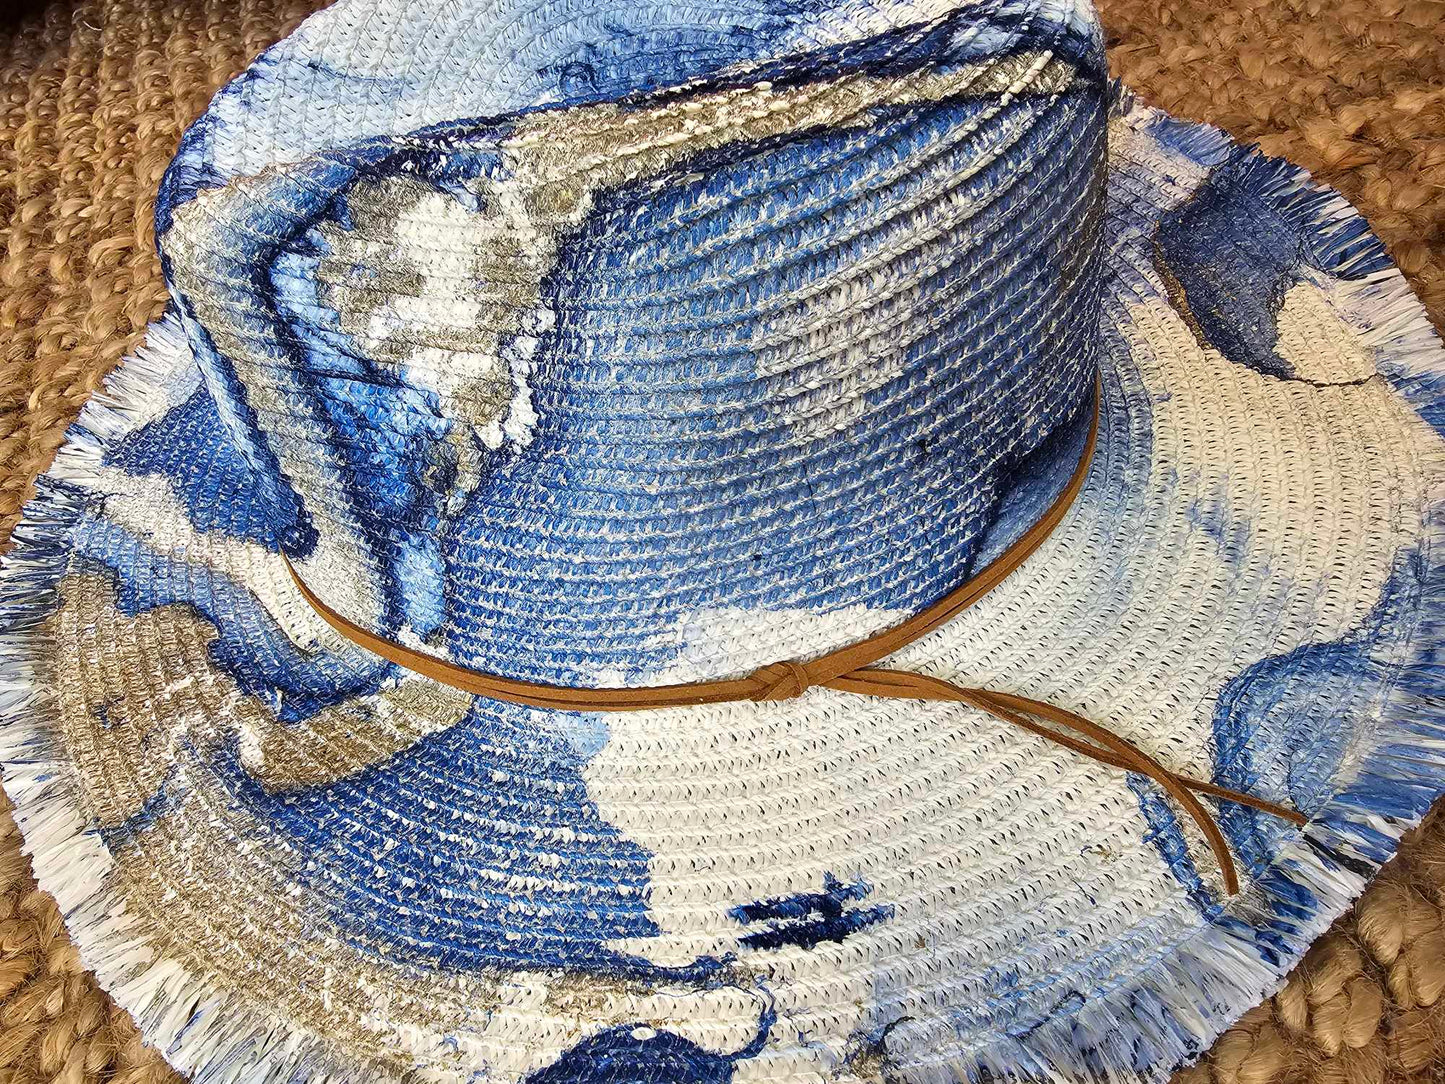 Blue Marbled Rancher Hat